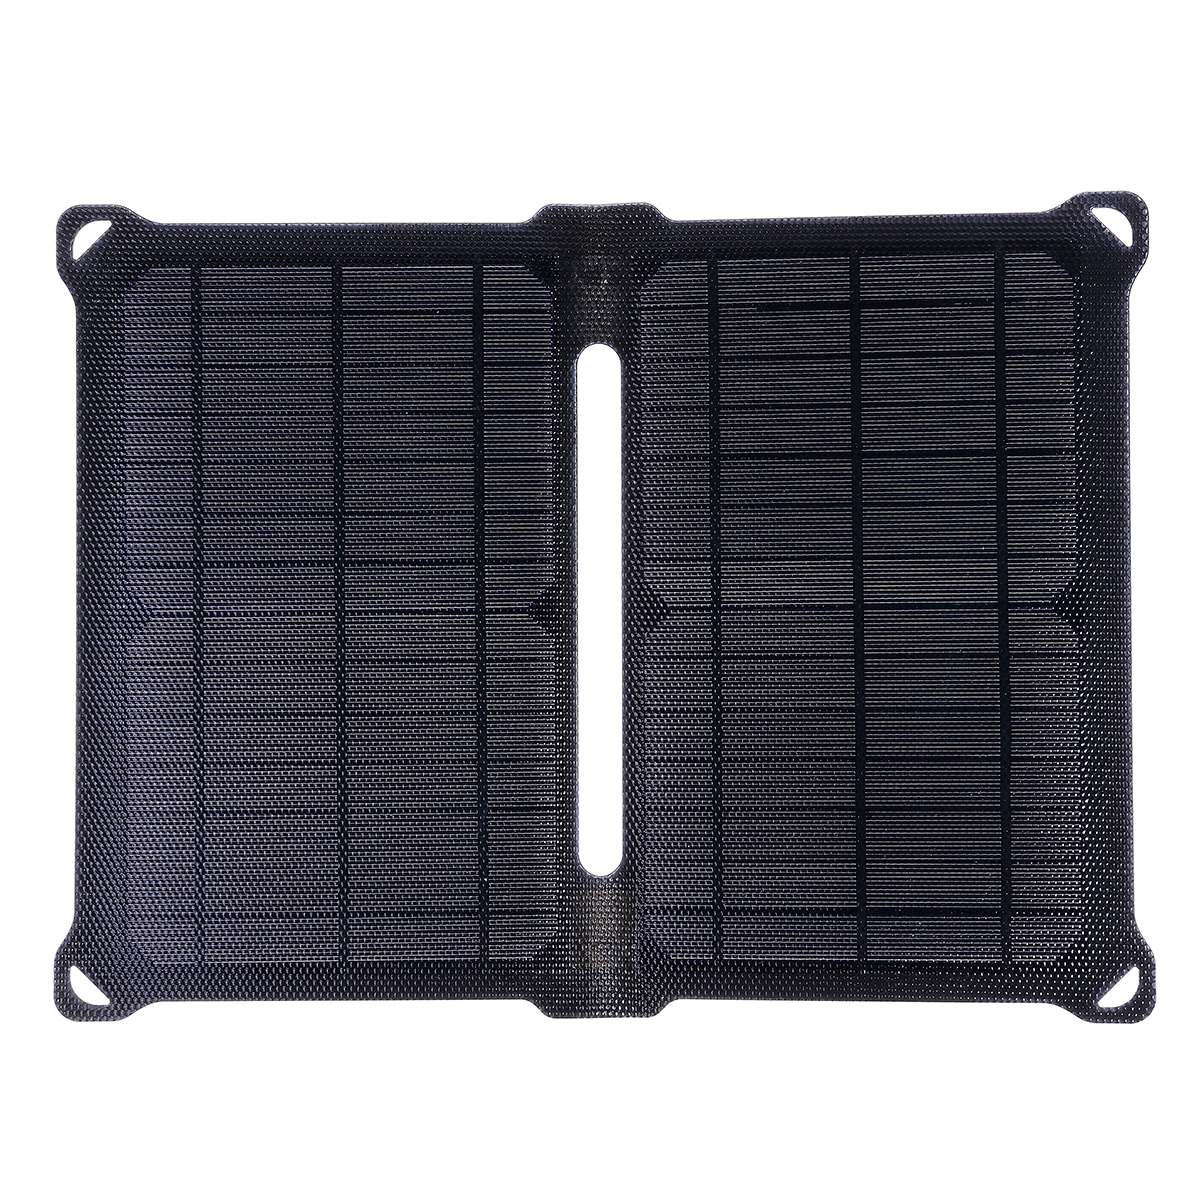 Foldable-Solar-Charger-Waterproof-ETFE-Monoctrystalline-Solar-Panel-Dual-USB-Ports-Outdoor-Camping-C-1935777-3